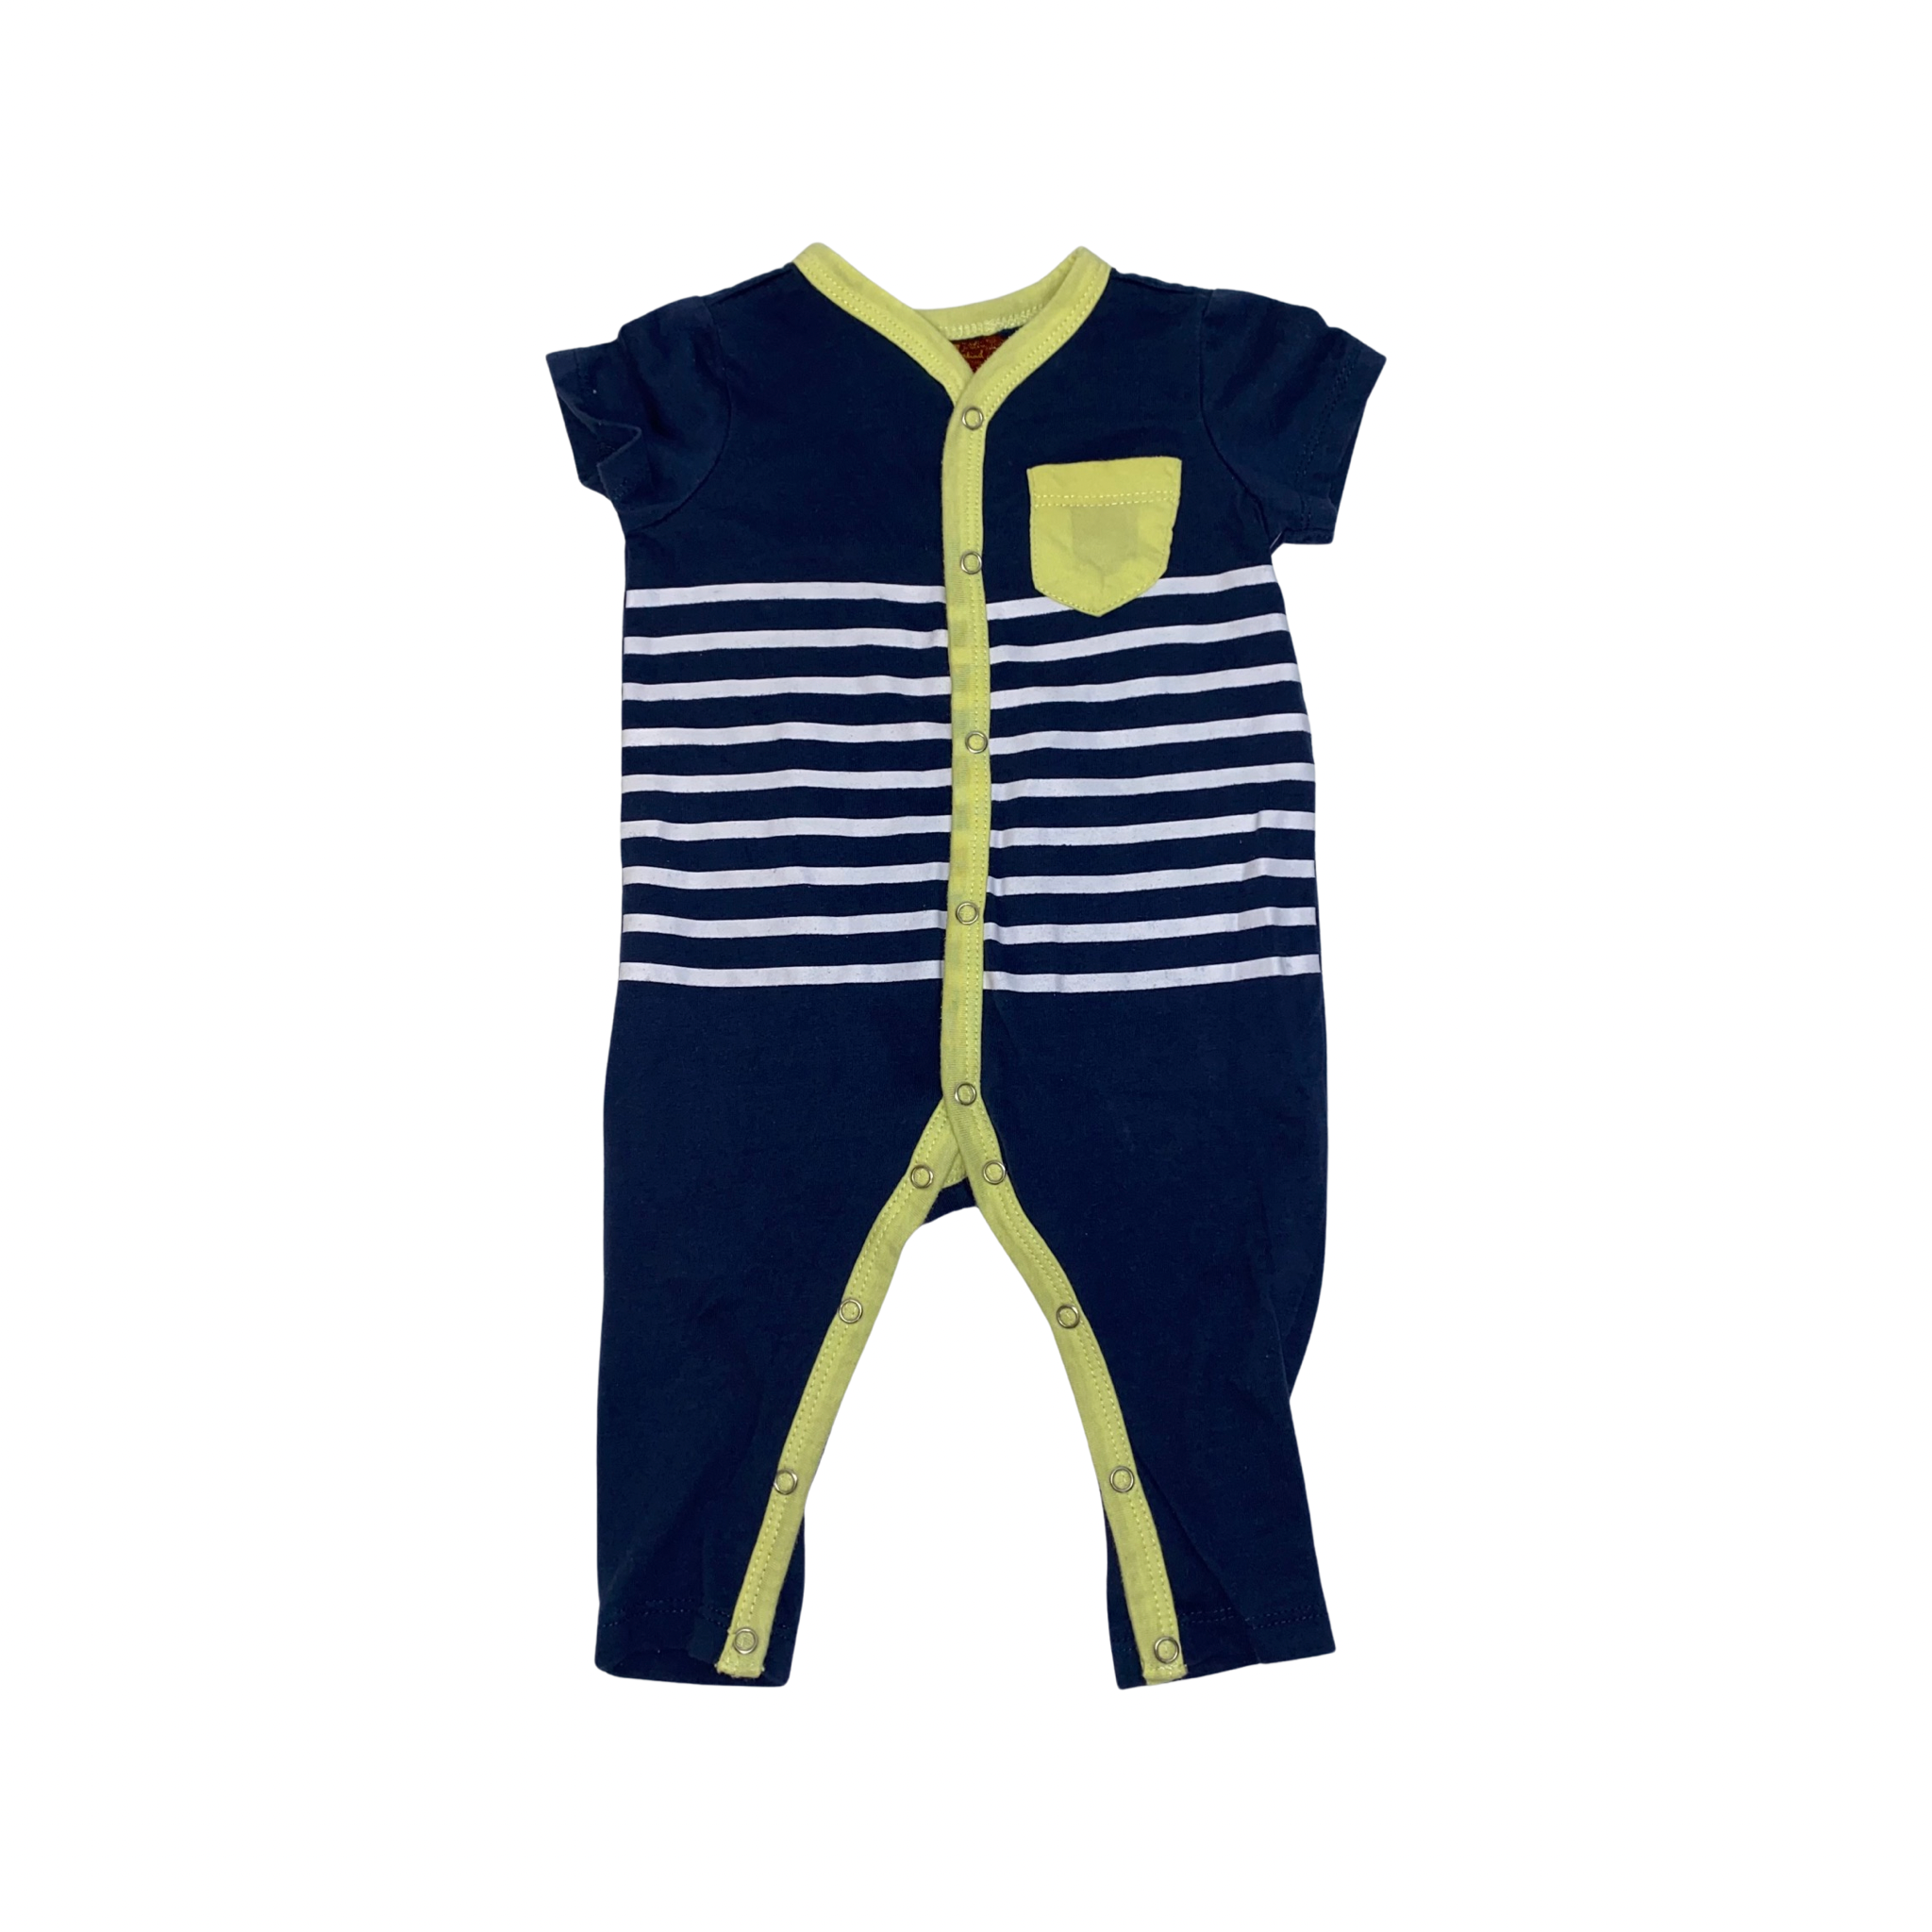 One piece outfit by 7 for all mankind size 3-6m